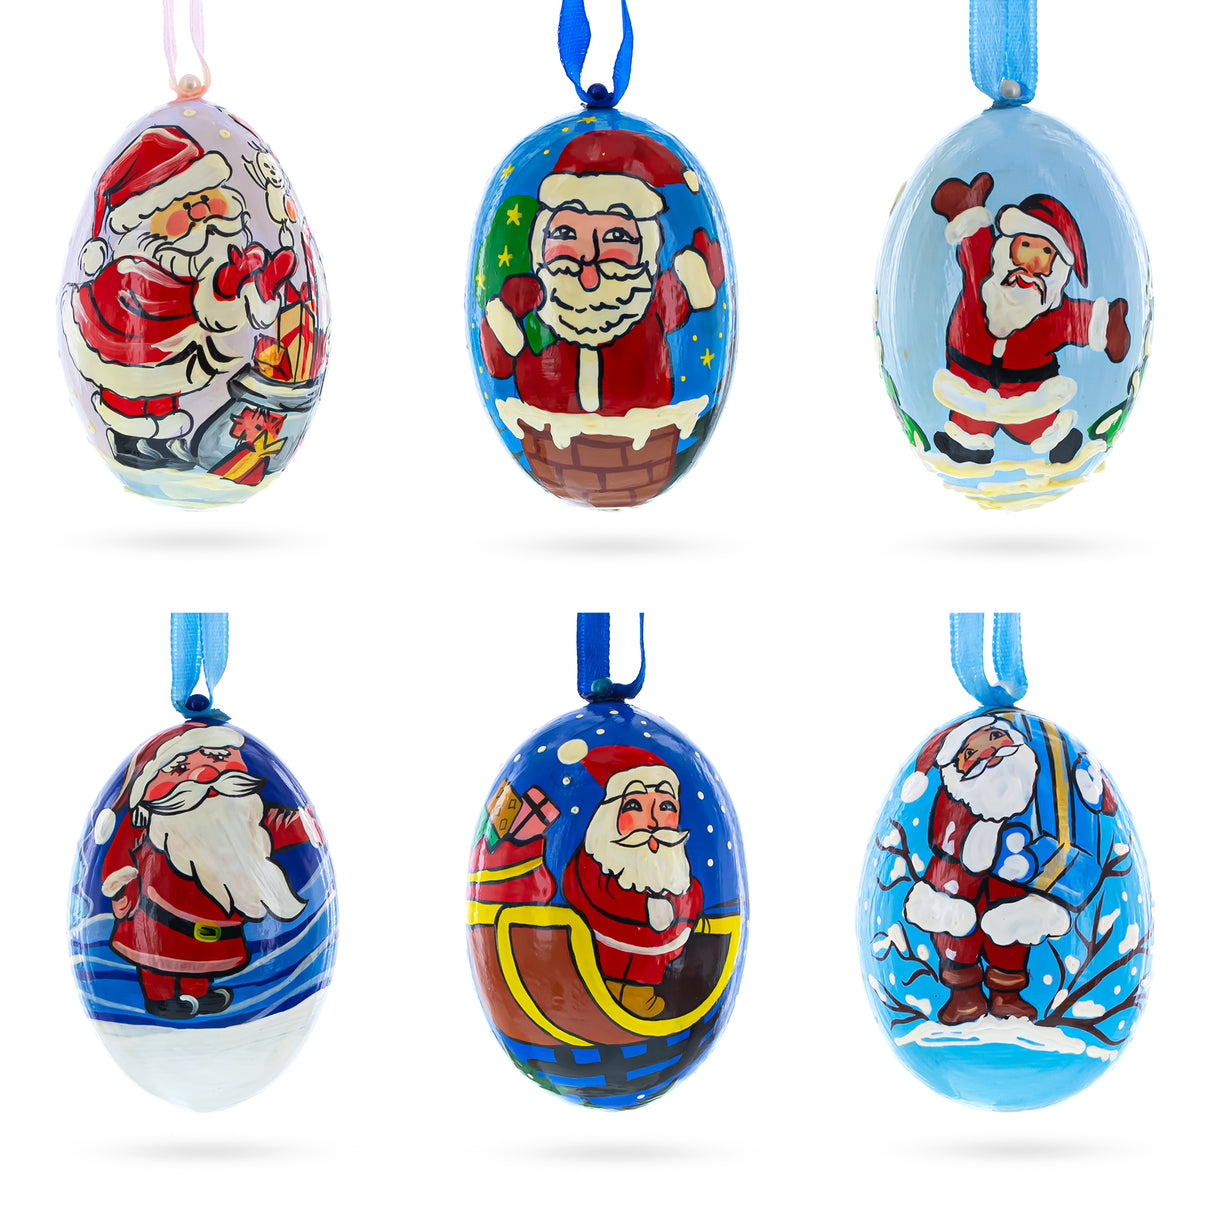 Set of 6 Santa Claus Wooden Christmas Ornaments 3 Inches in Multi color, Oval shape